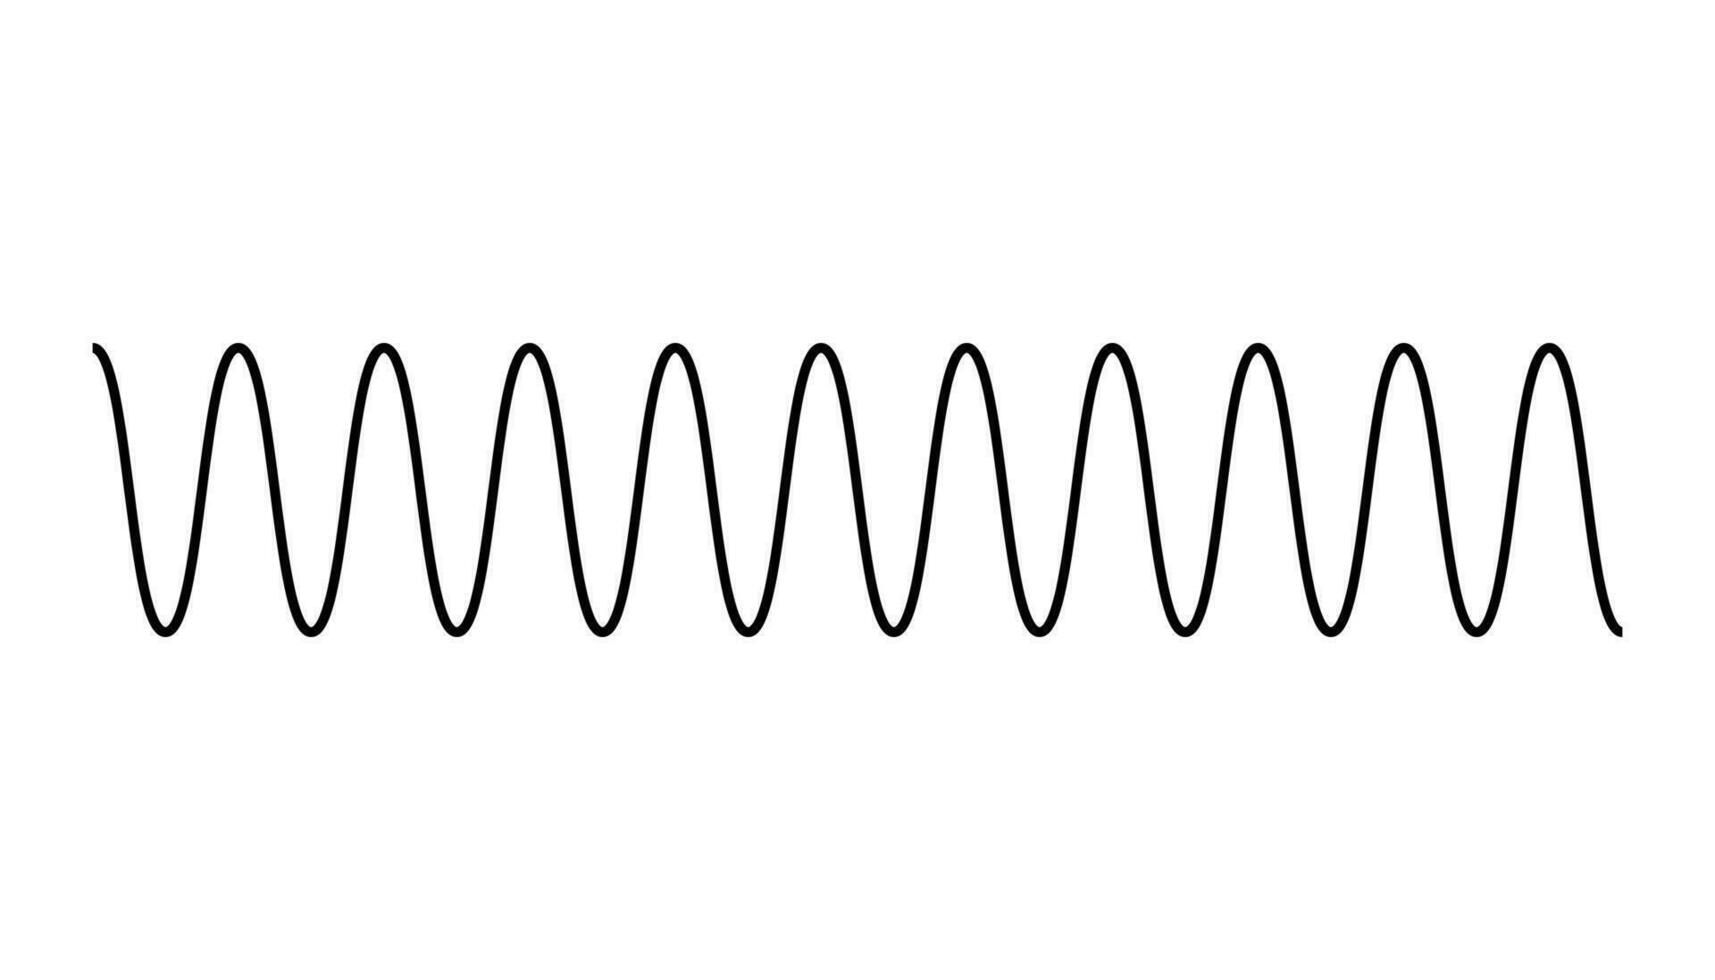 Direction of wave motion. Crest, amplitude, trough, height and length of wave. Parts of the wave diagram vector. vector